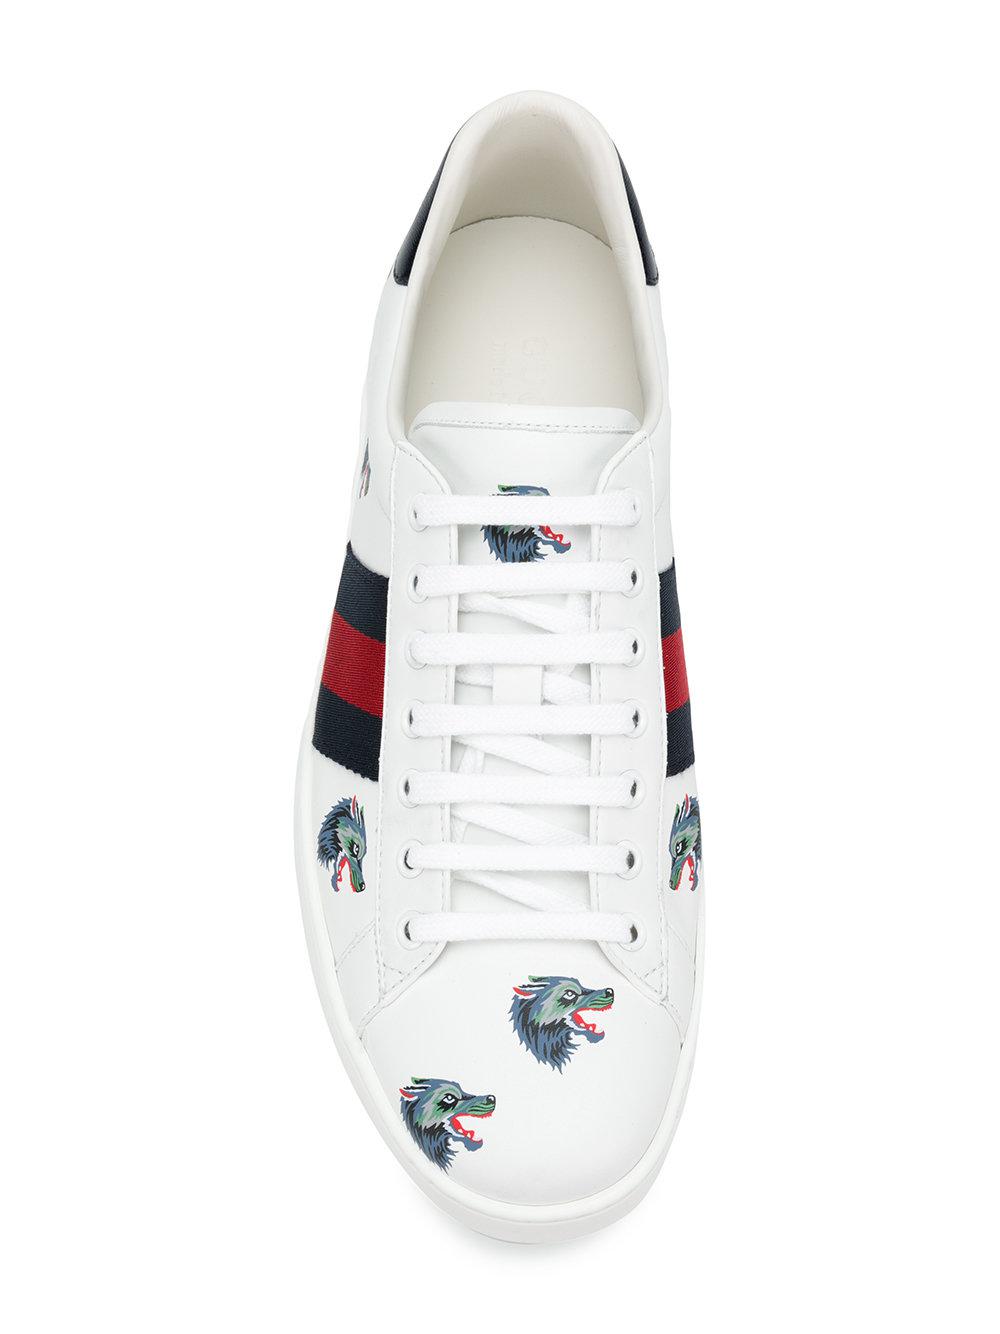 Gucci Ace Wolf Sneakers Flash Sales, 50% OFF | www.smokymountains.org